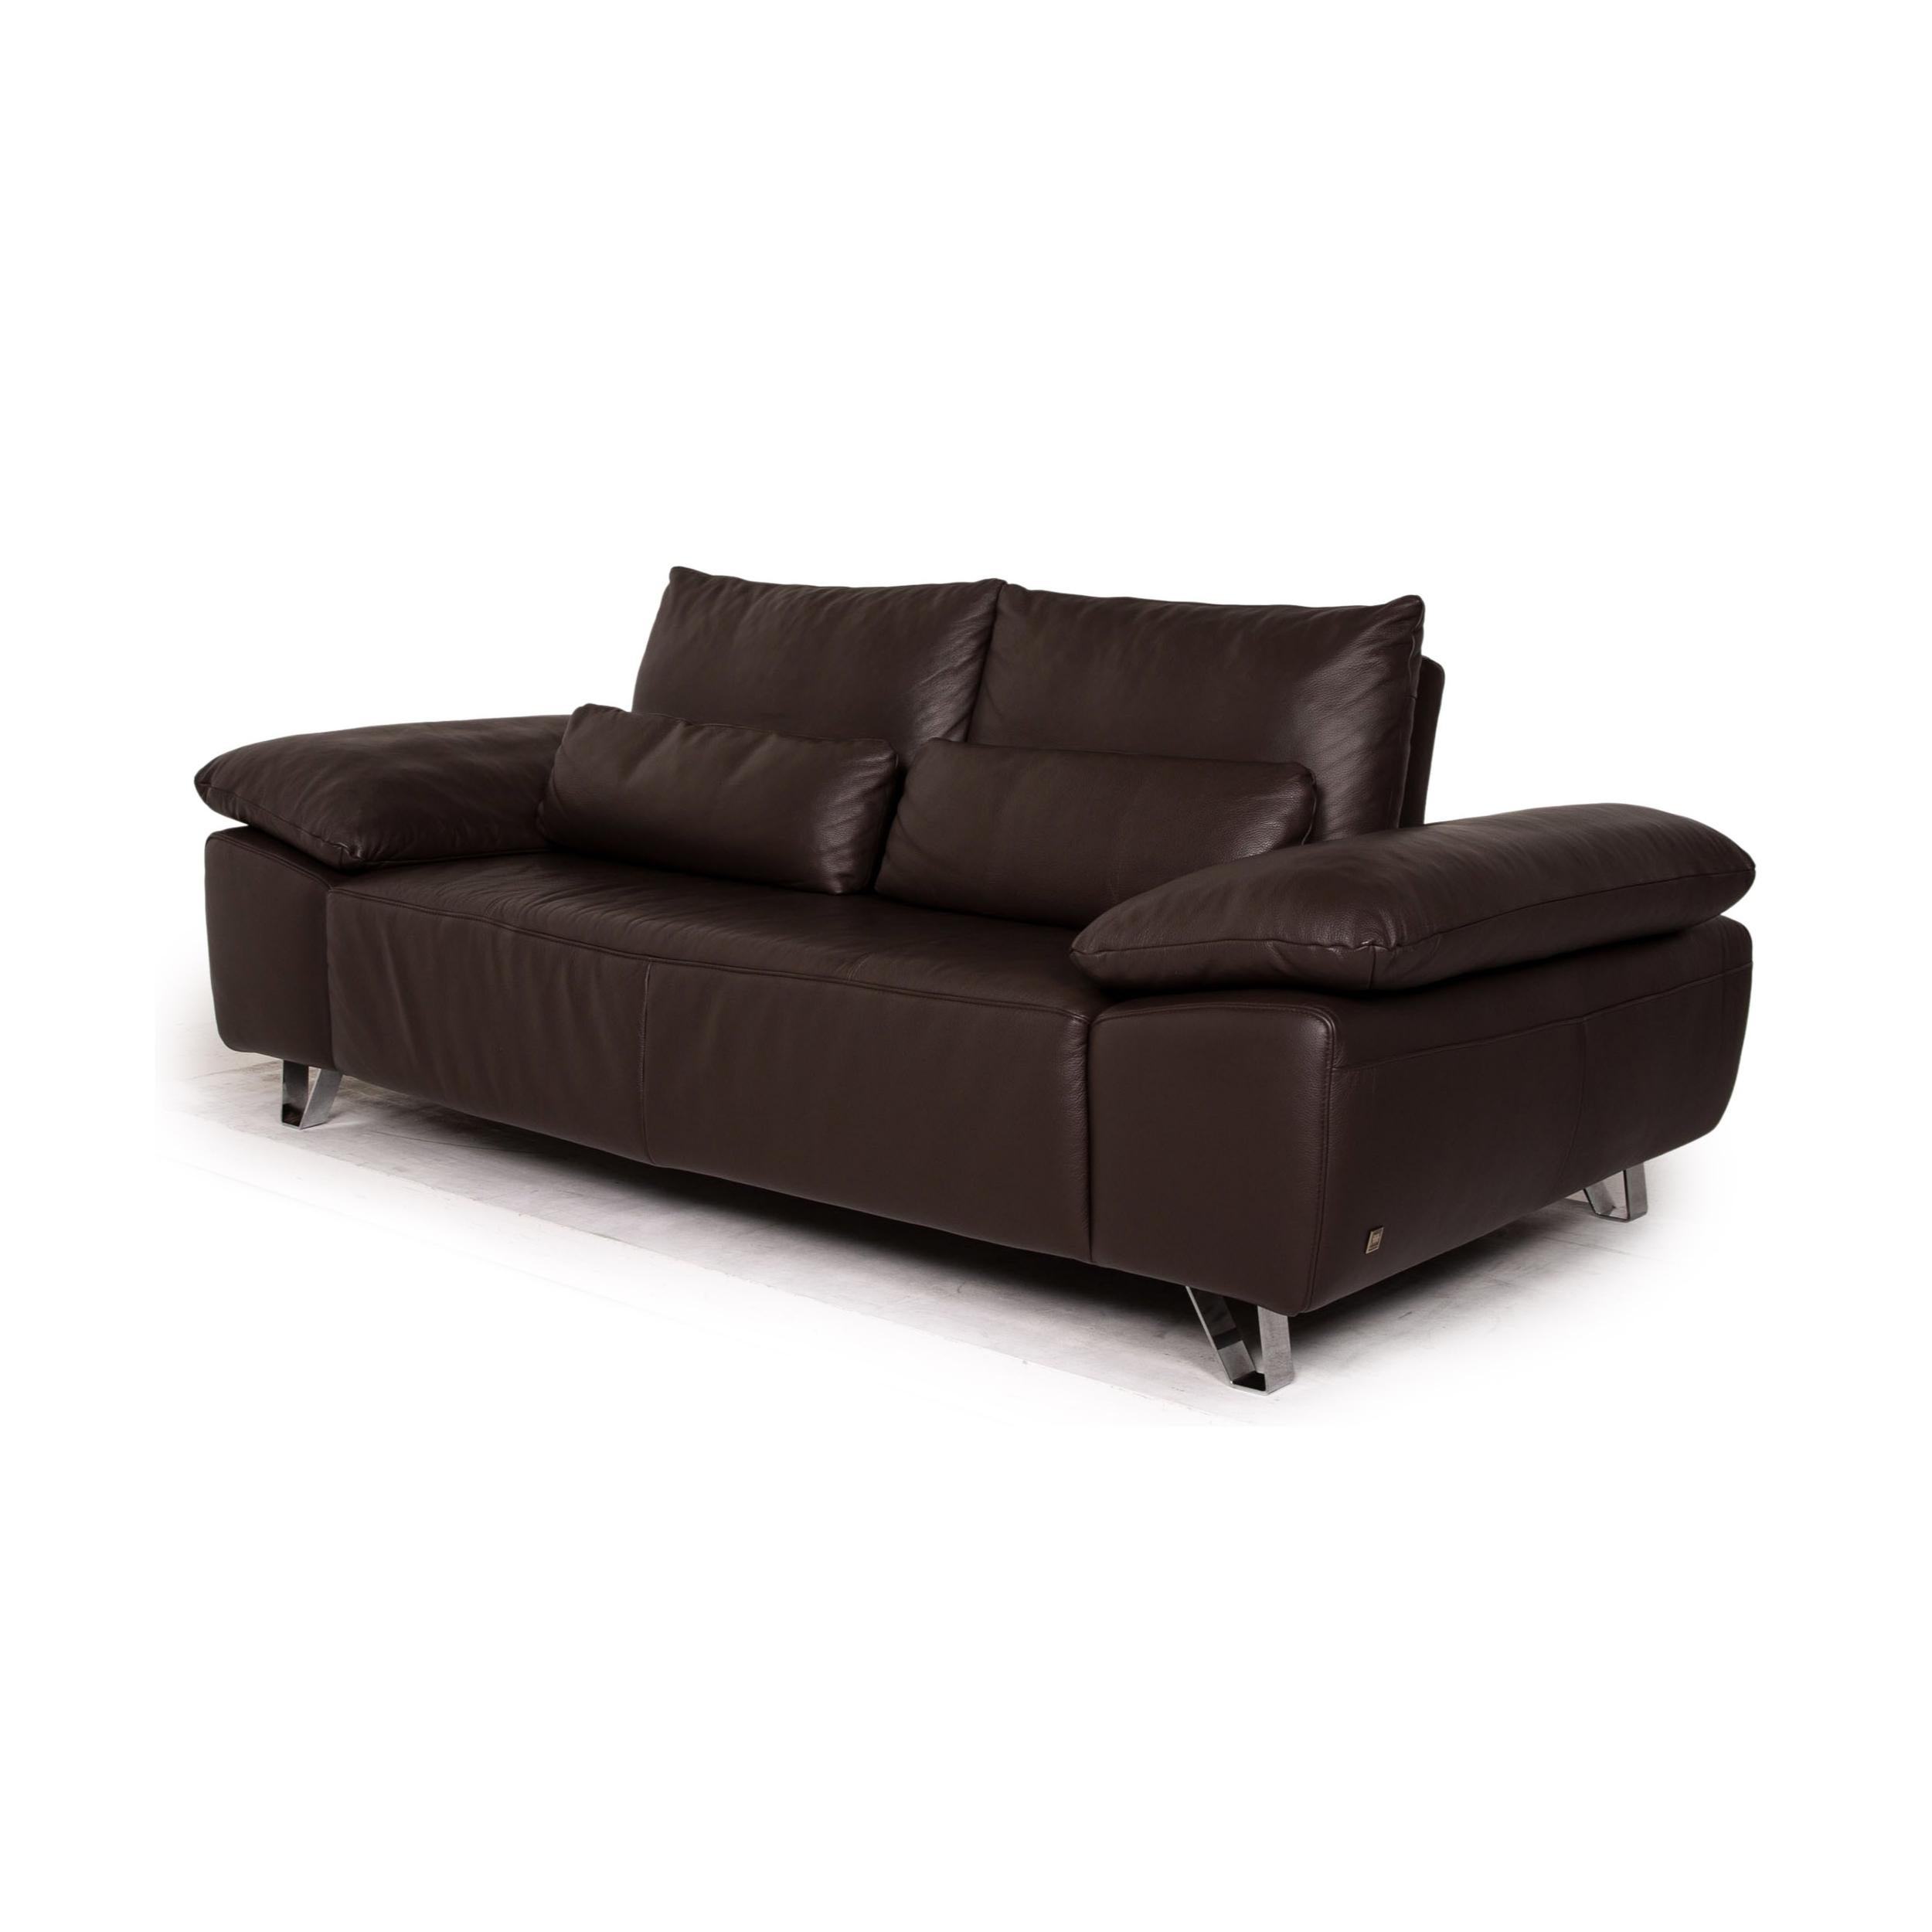 Musterring MR 680 Two-Seater Sofa Brown Leather Couch Function 3